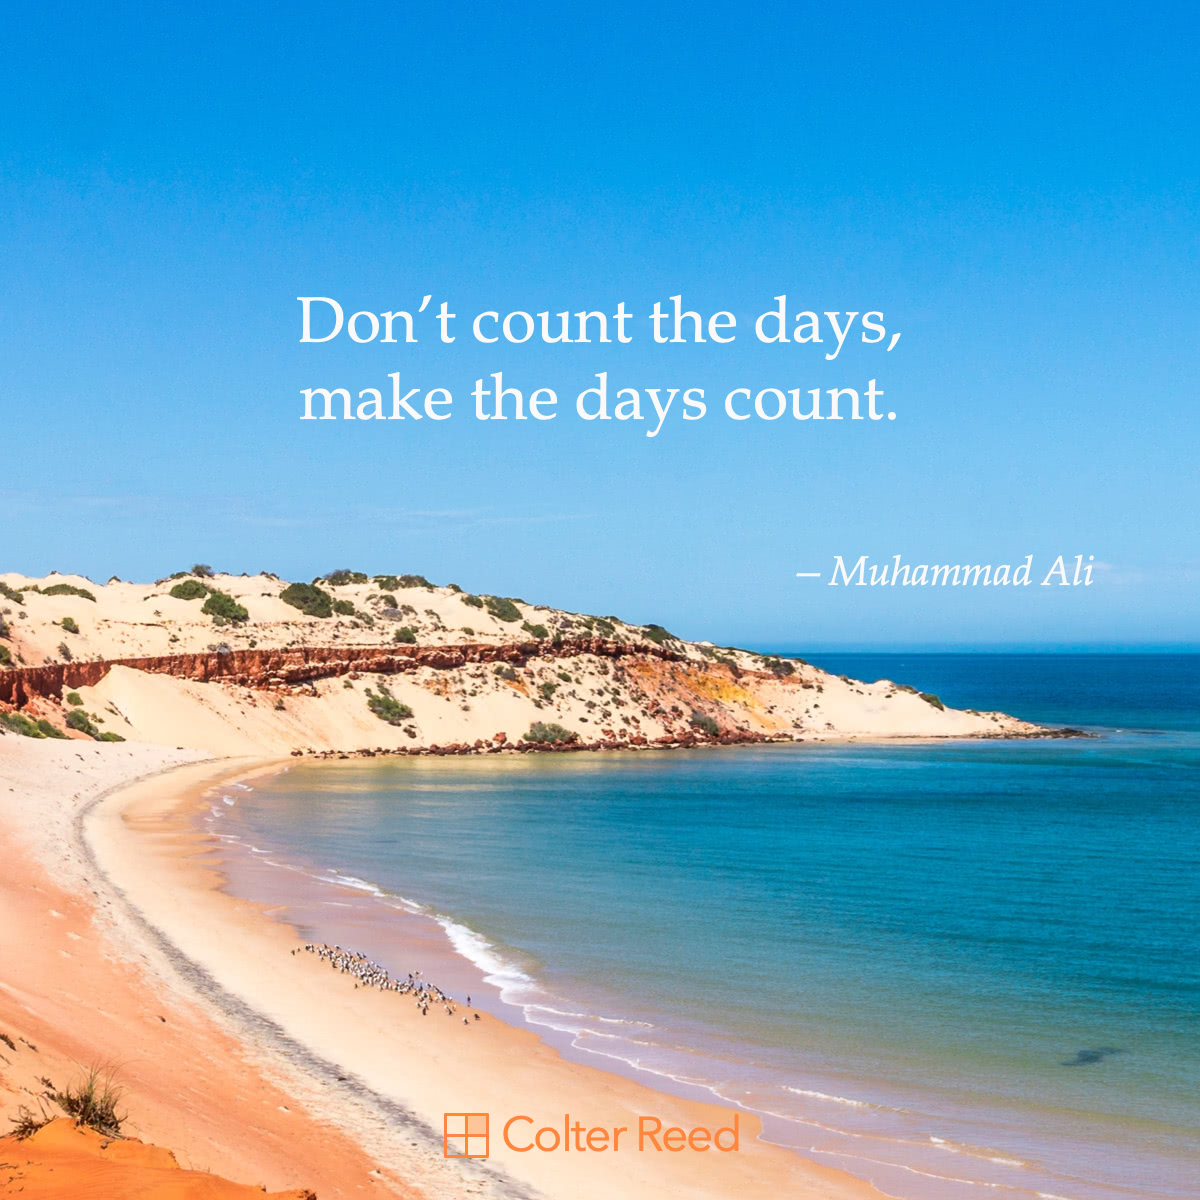 Don’t count the days, make the days count. —Muhammad Ali